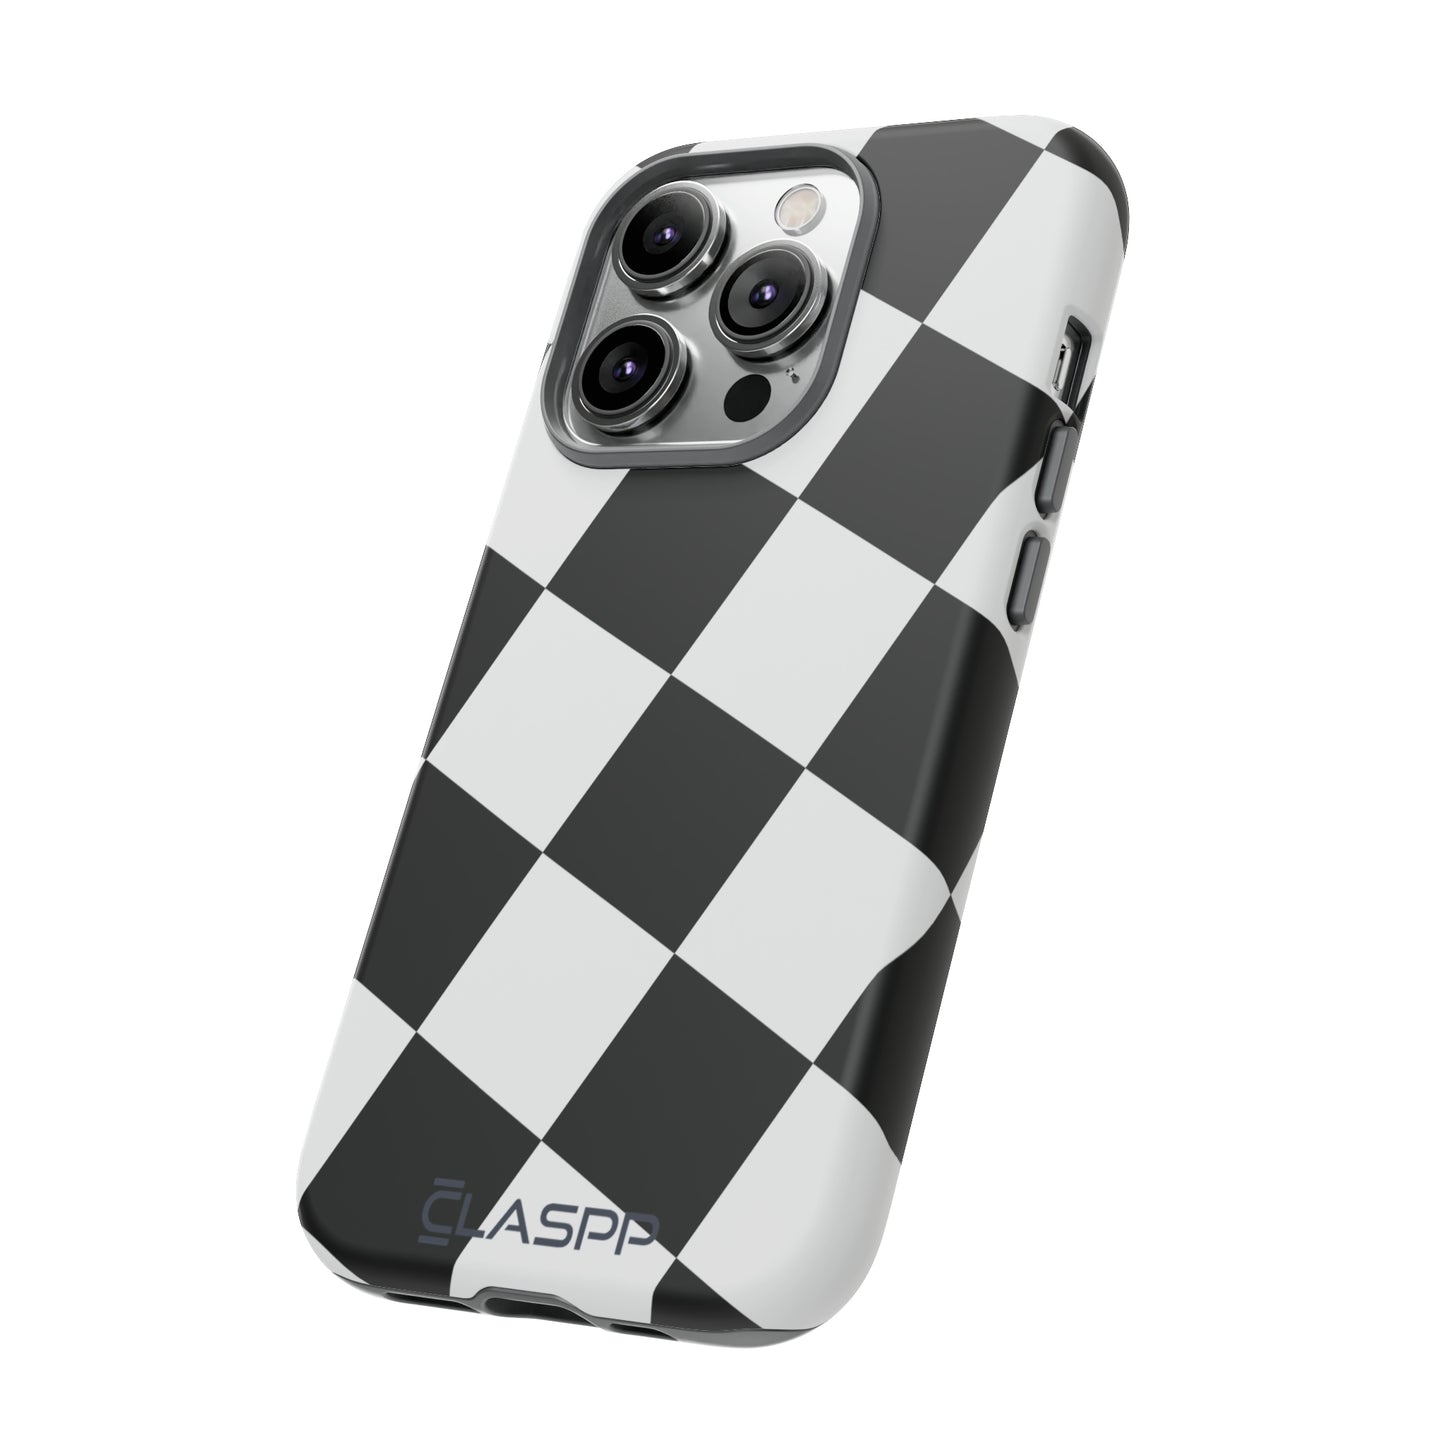 Slanted Checkers | Hardshell Dual Layer Phone Case